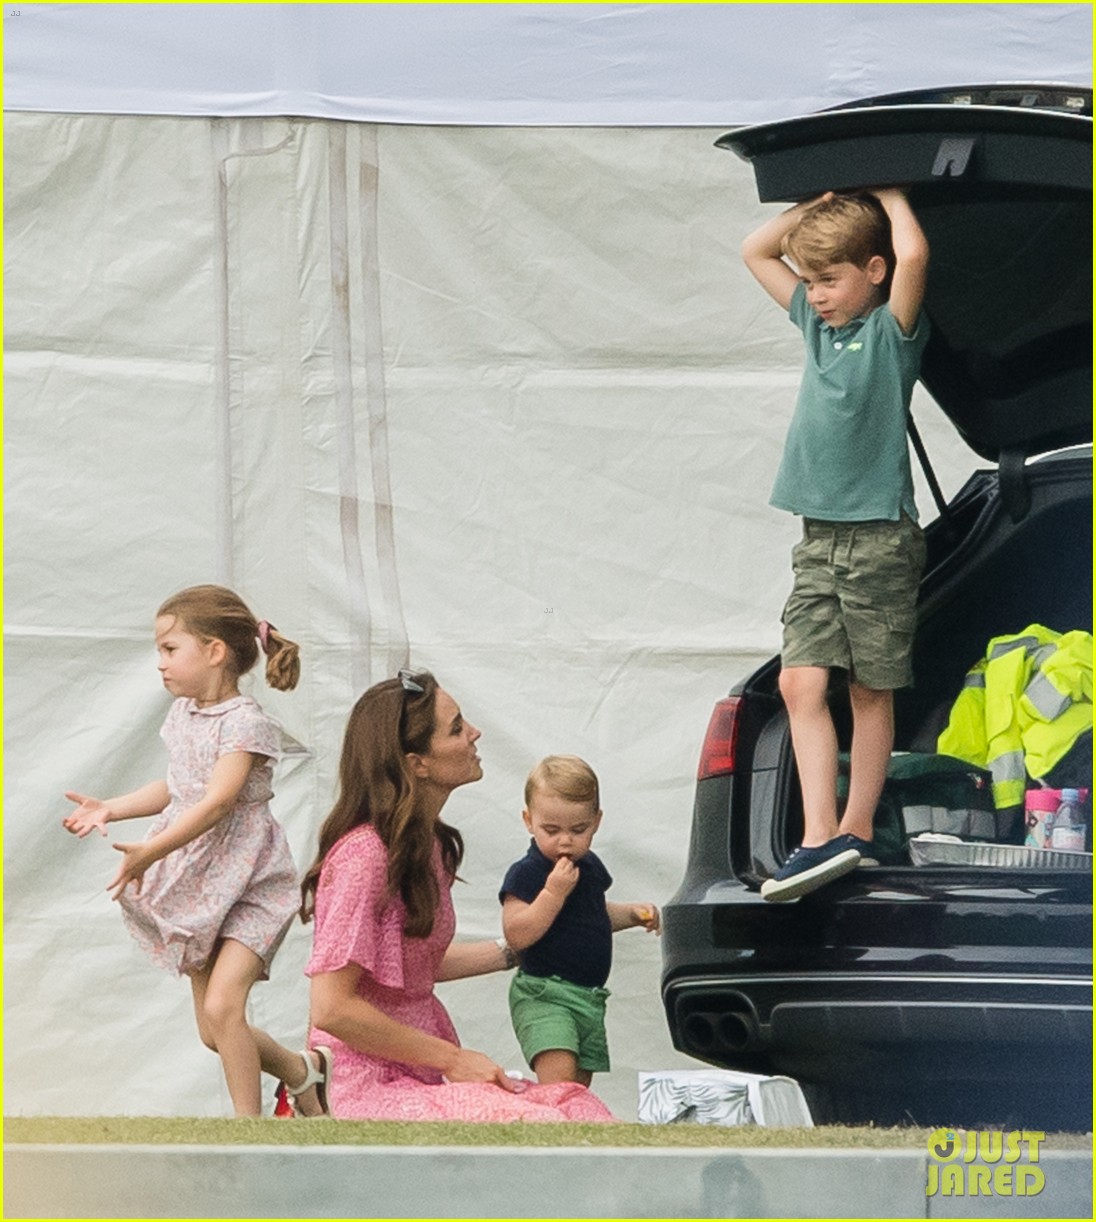 Prince George Princess Charlotte Play While Dad Prince William Competes In Polo Match Photo 4320085 Celebrity Babies Kate Middleton Prince George Prince Louis Prince William Princess Charlotte Pictures Just Jared